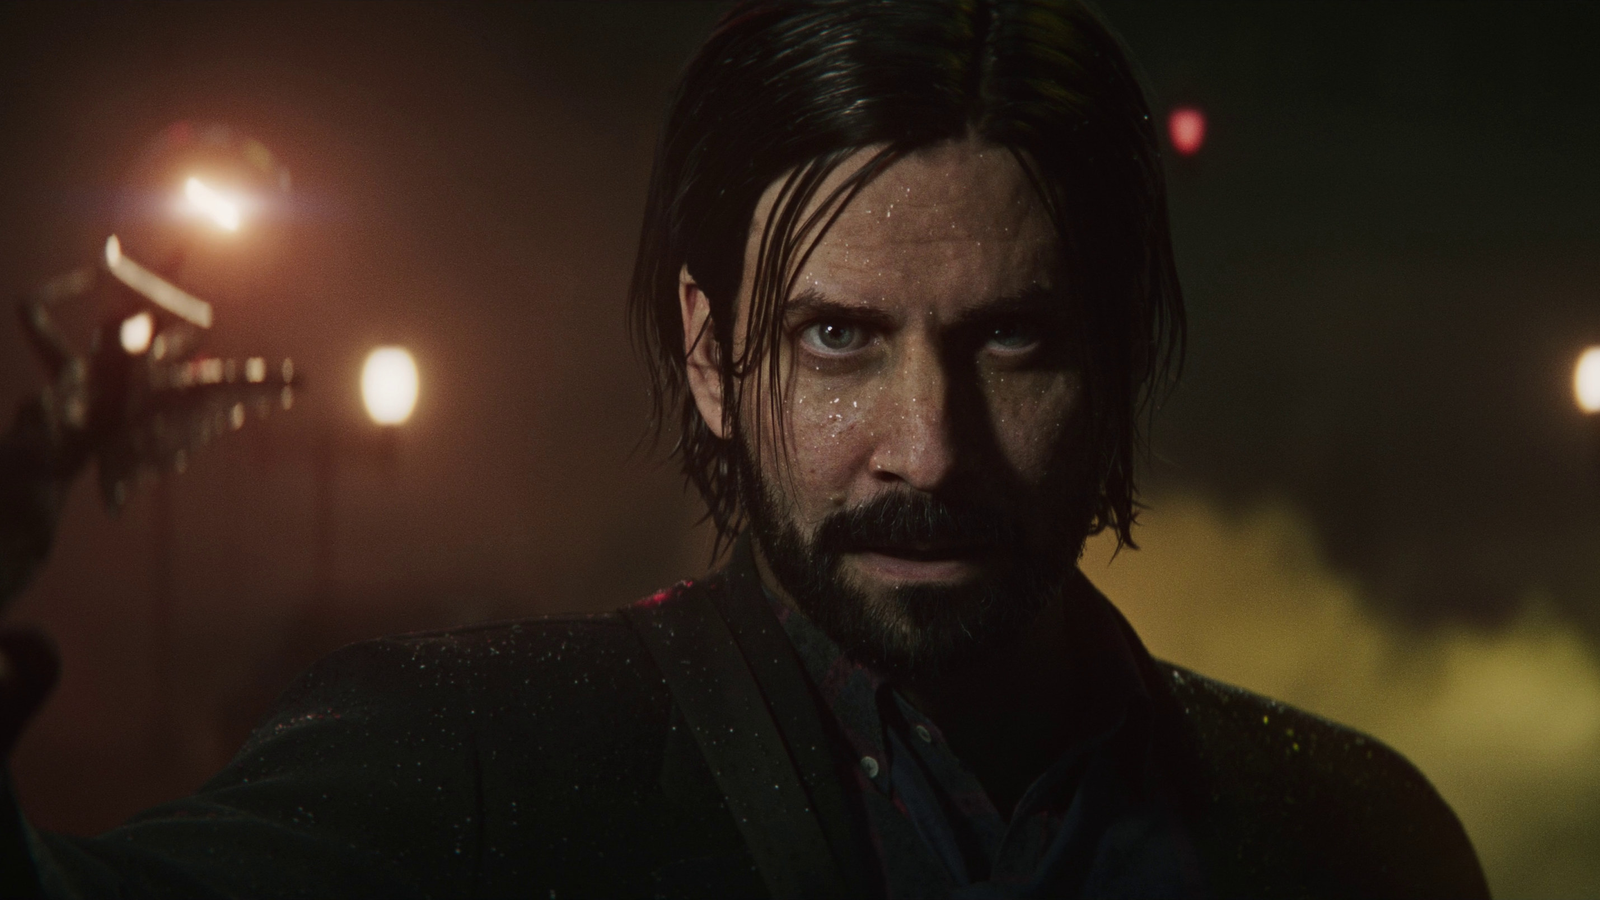 Alan Wake 2 is supposed to come out in October apparently